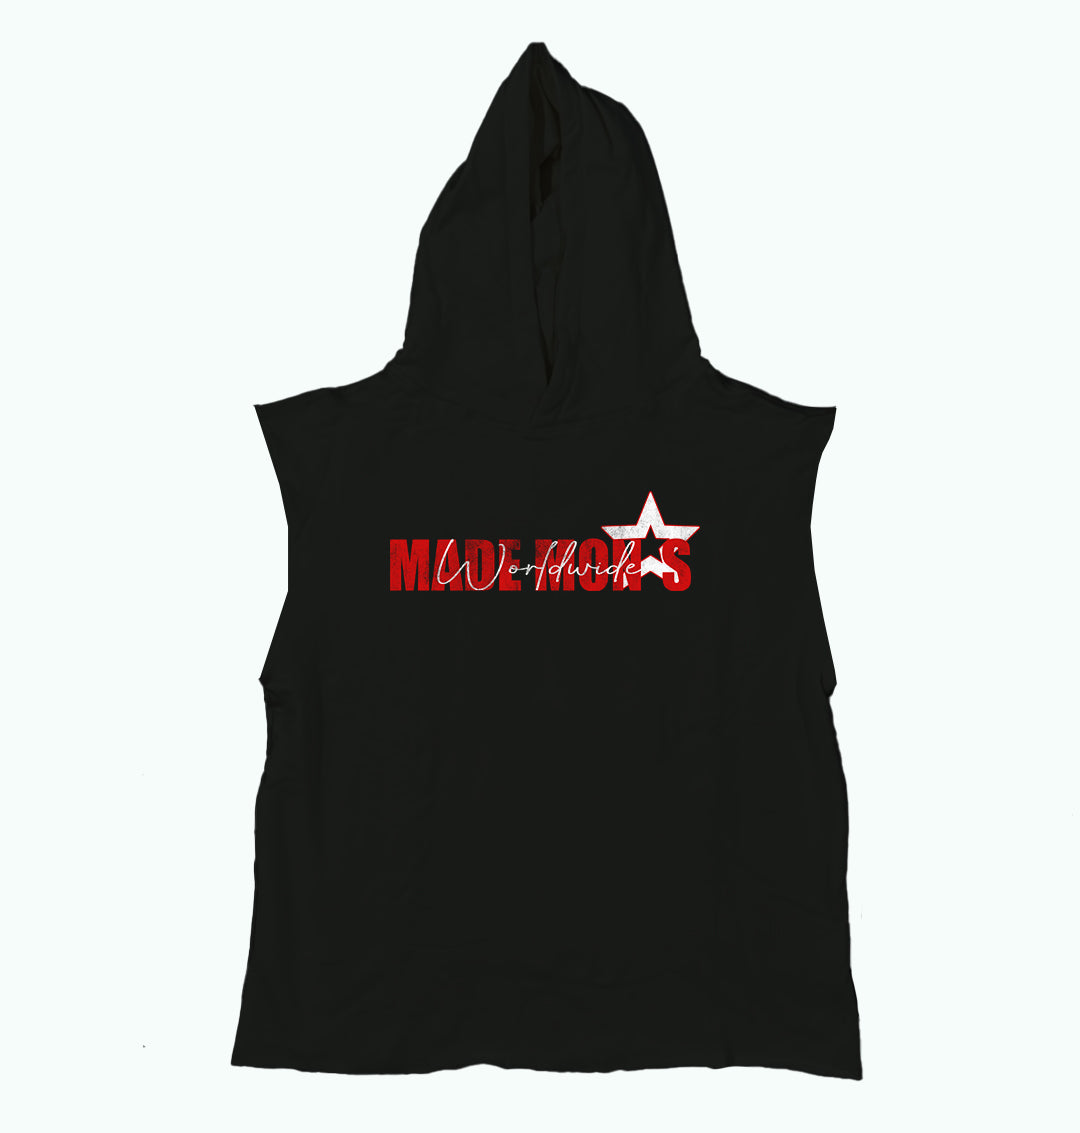 "Never Gave A F*ck" Sleeveless Cropped Hoodie